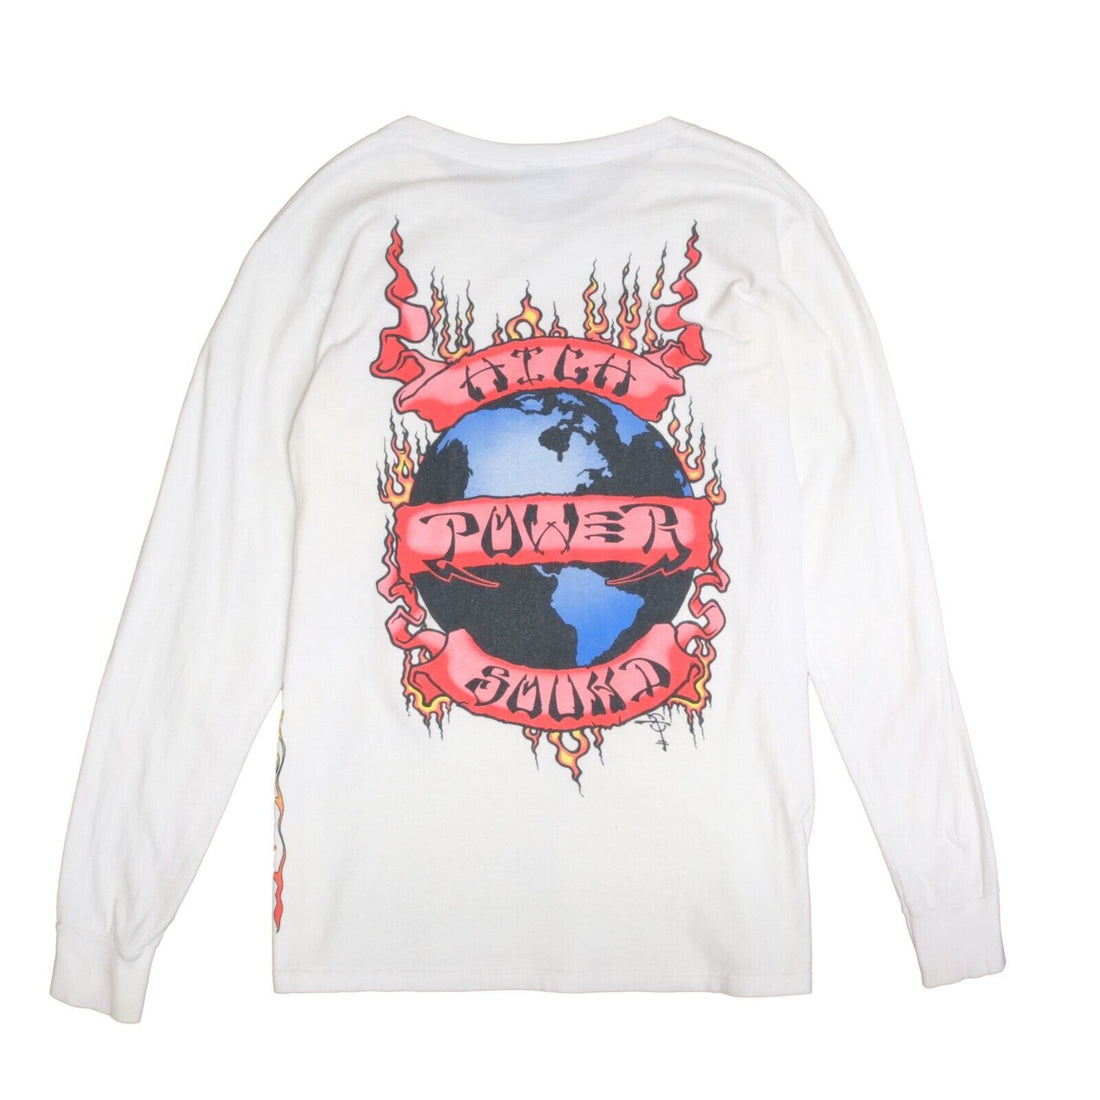 Stussy High Power Squad Long Sleeve T-Shirt Size Small White